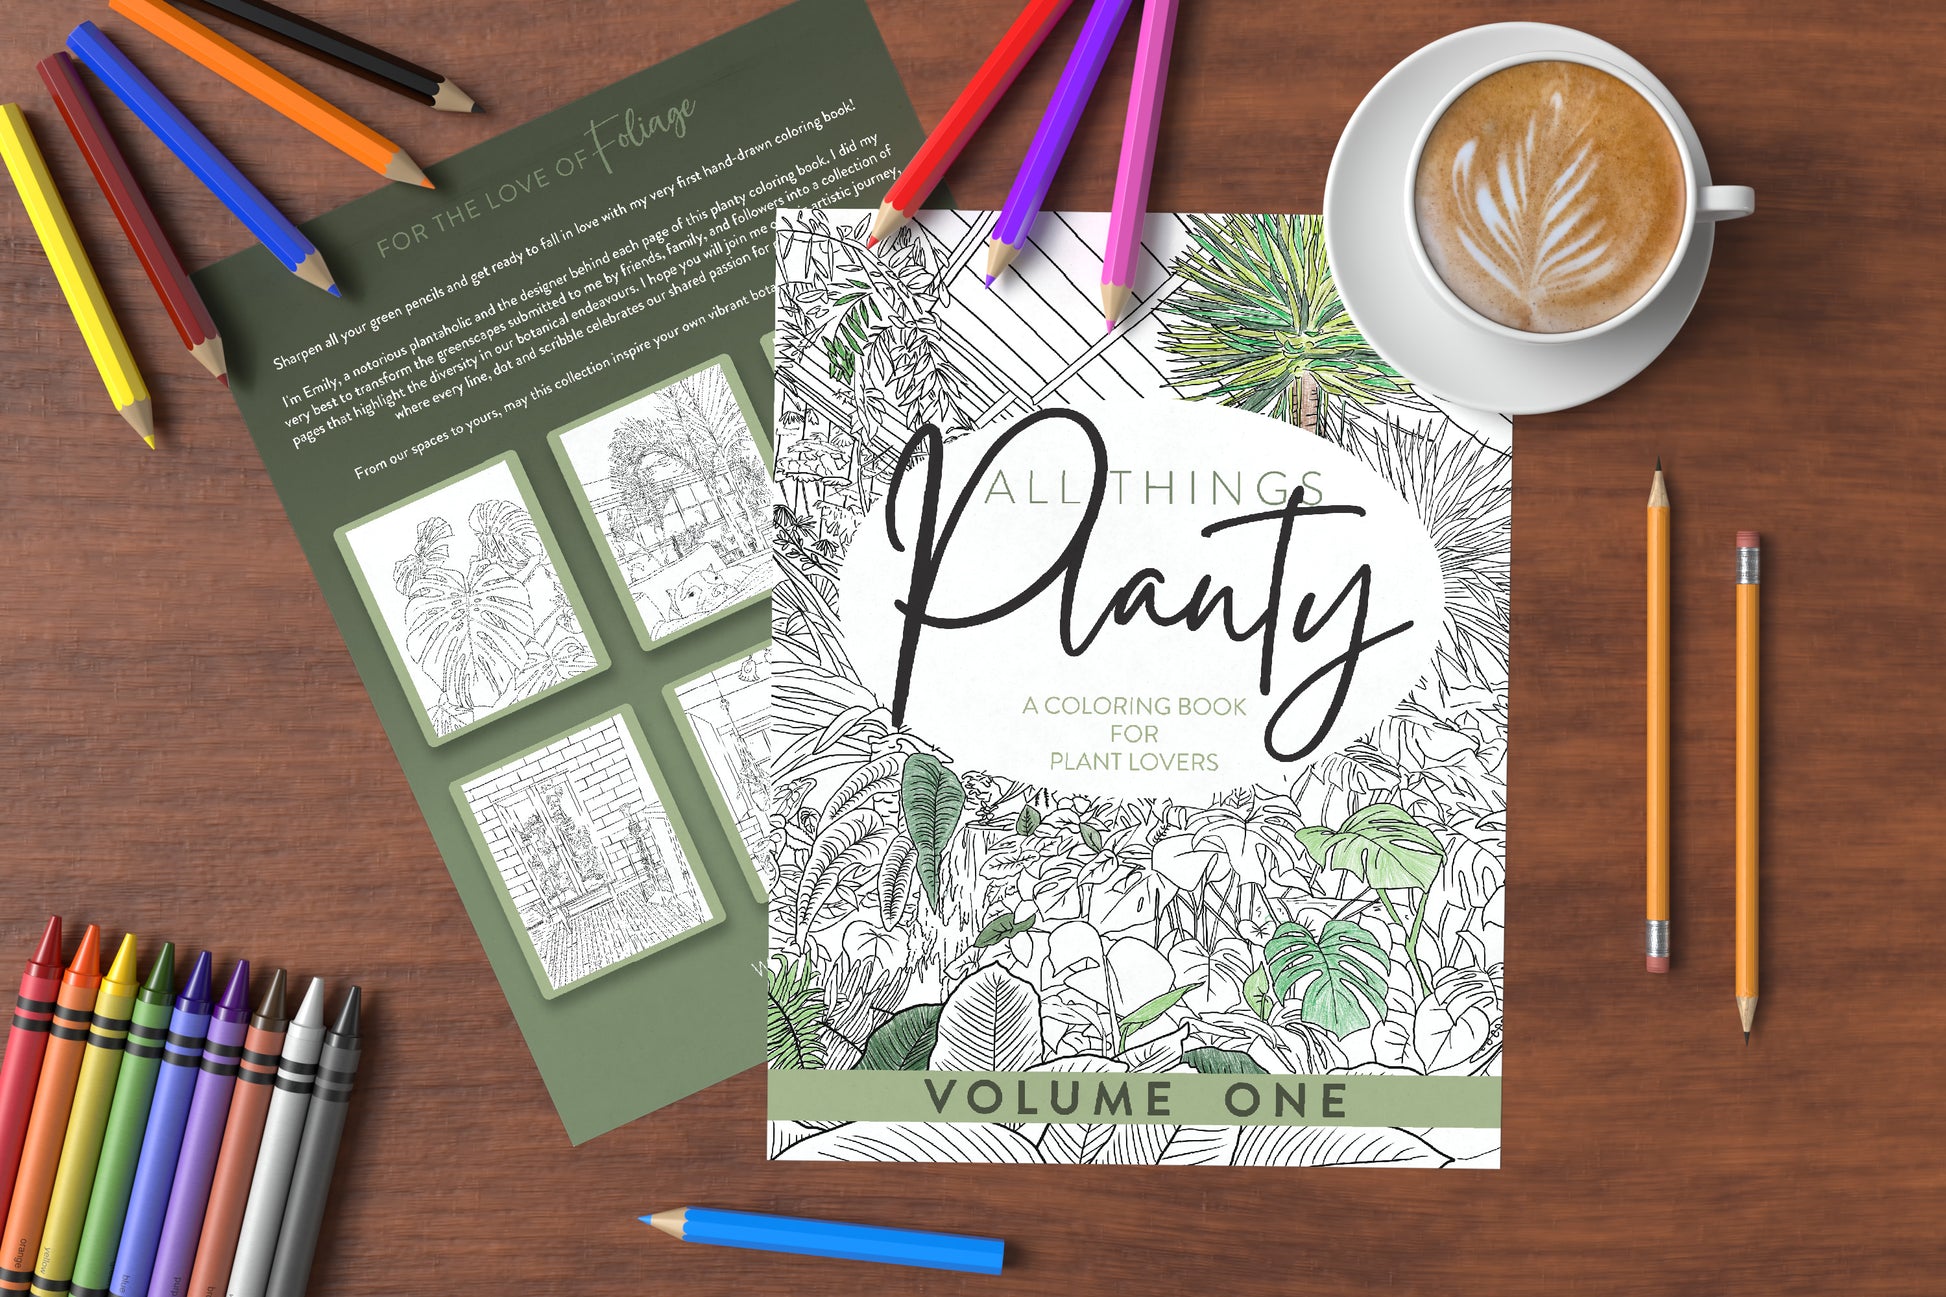 All Things Planty - A Coloring Book for Plant Lovers, Vol 1. – For the Love  of Foliage